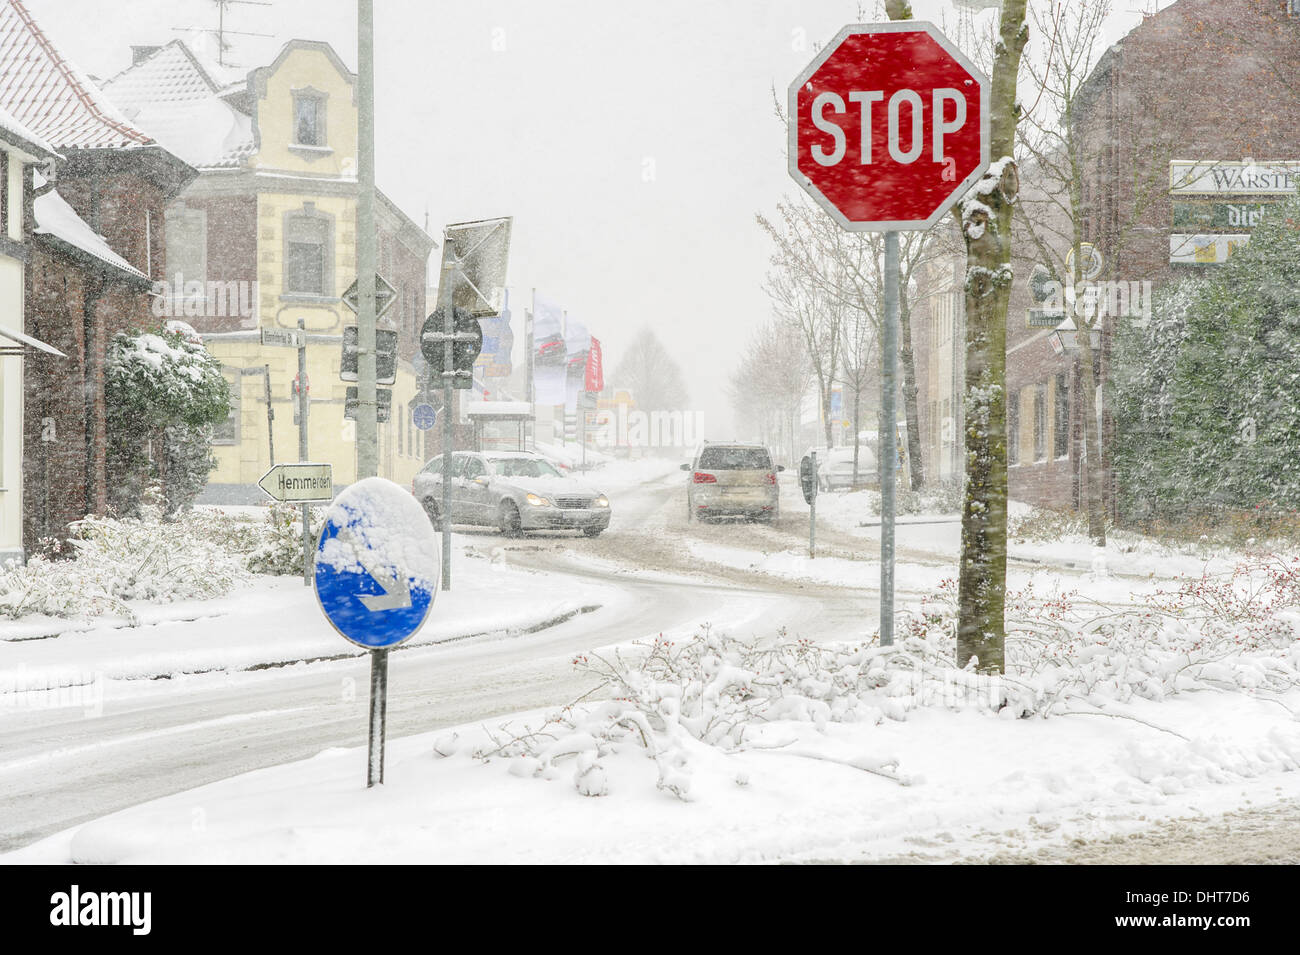 Stop sign on a snowy road crossing Stock Photo